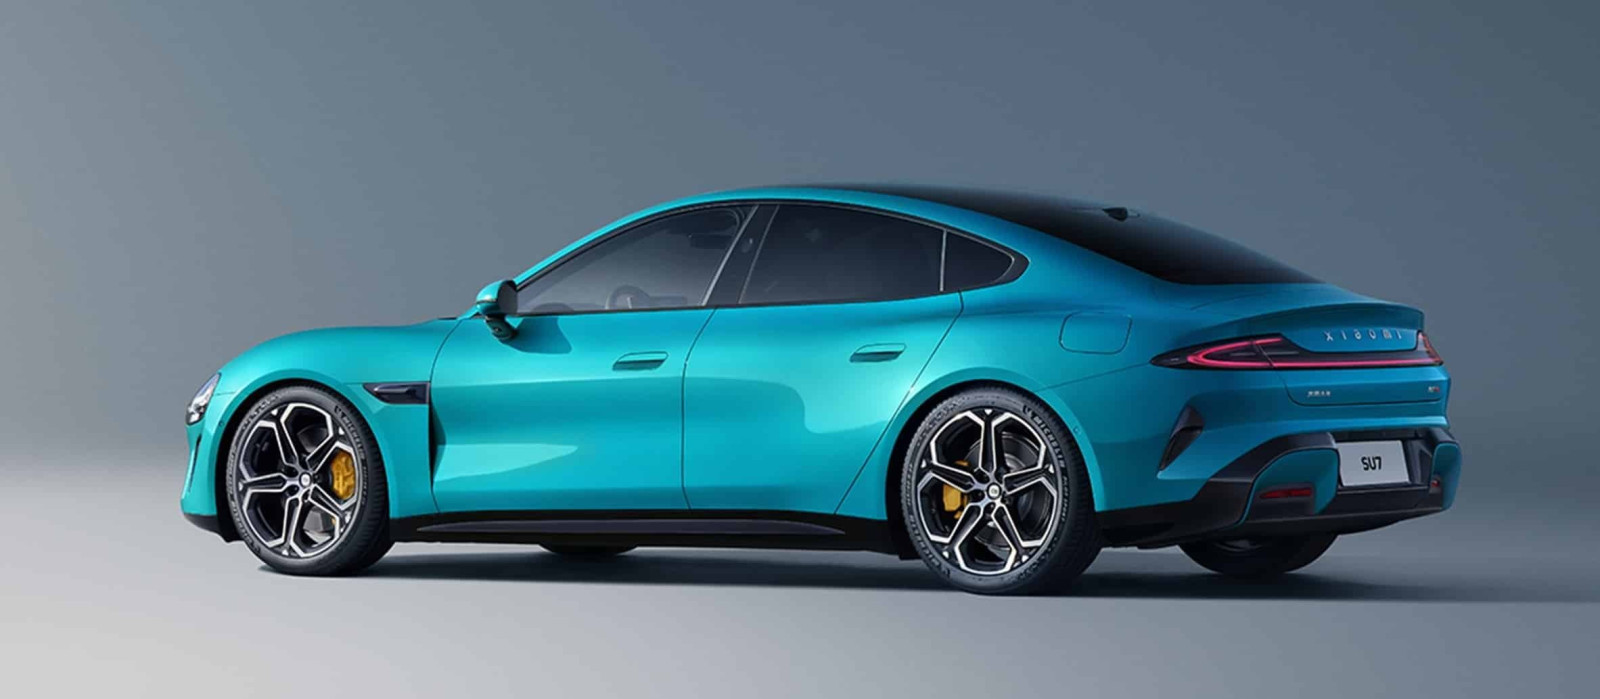 <blockquote class="twitter-tweet" data-media-max-width="560"><p lang="en" dir="ltr">The second echo of BMW in Xiaomi&#39;s car design team has just been revealed.<br><br>Look who entered the stage: Mr. Chris Bangle! Although it was already clear that Mr. Sawyer Li, also ex-BMW, was heading up the EV design department at Xiaomi Technology, we now have a second clear echo… <a href="https://t.co/ubXLJuph8o">pic.twitter.com/ubXLJuph8o</a></p>&mdash; Tom van Dillen (@vandillenpek) <a href="https://twitter.com/vandillenpek/status/1740553812866408760?ref_src=twsrc%5Etfw">December 29, 2023</a></blockquote> <script async src="https://platform.twitter.com/widgets.js" charset="utf-8"></script>